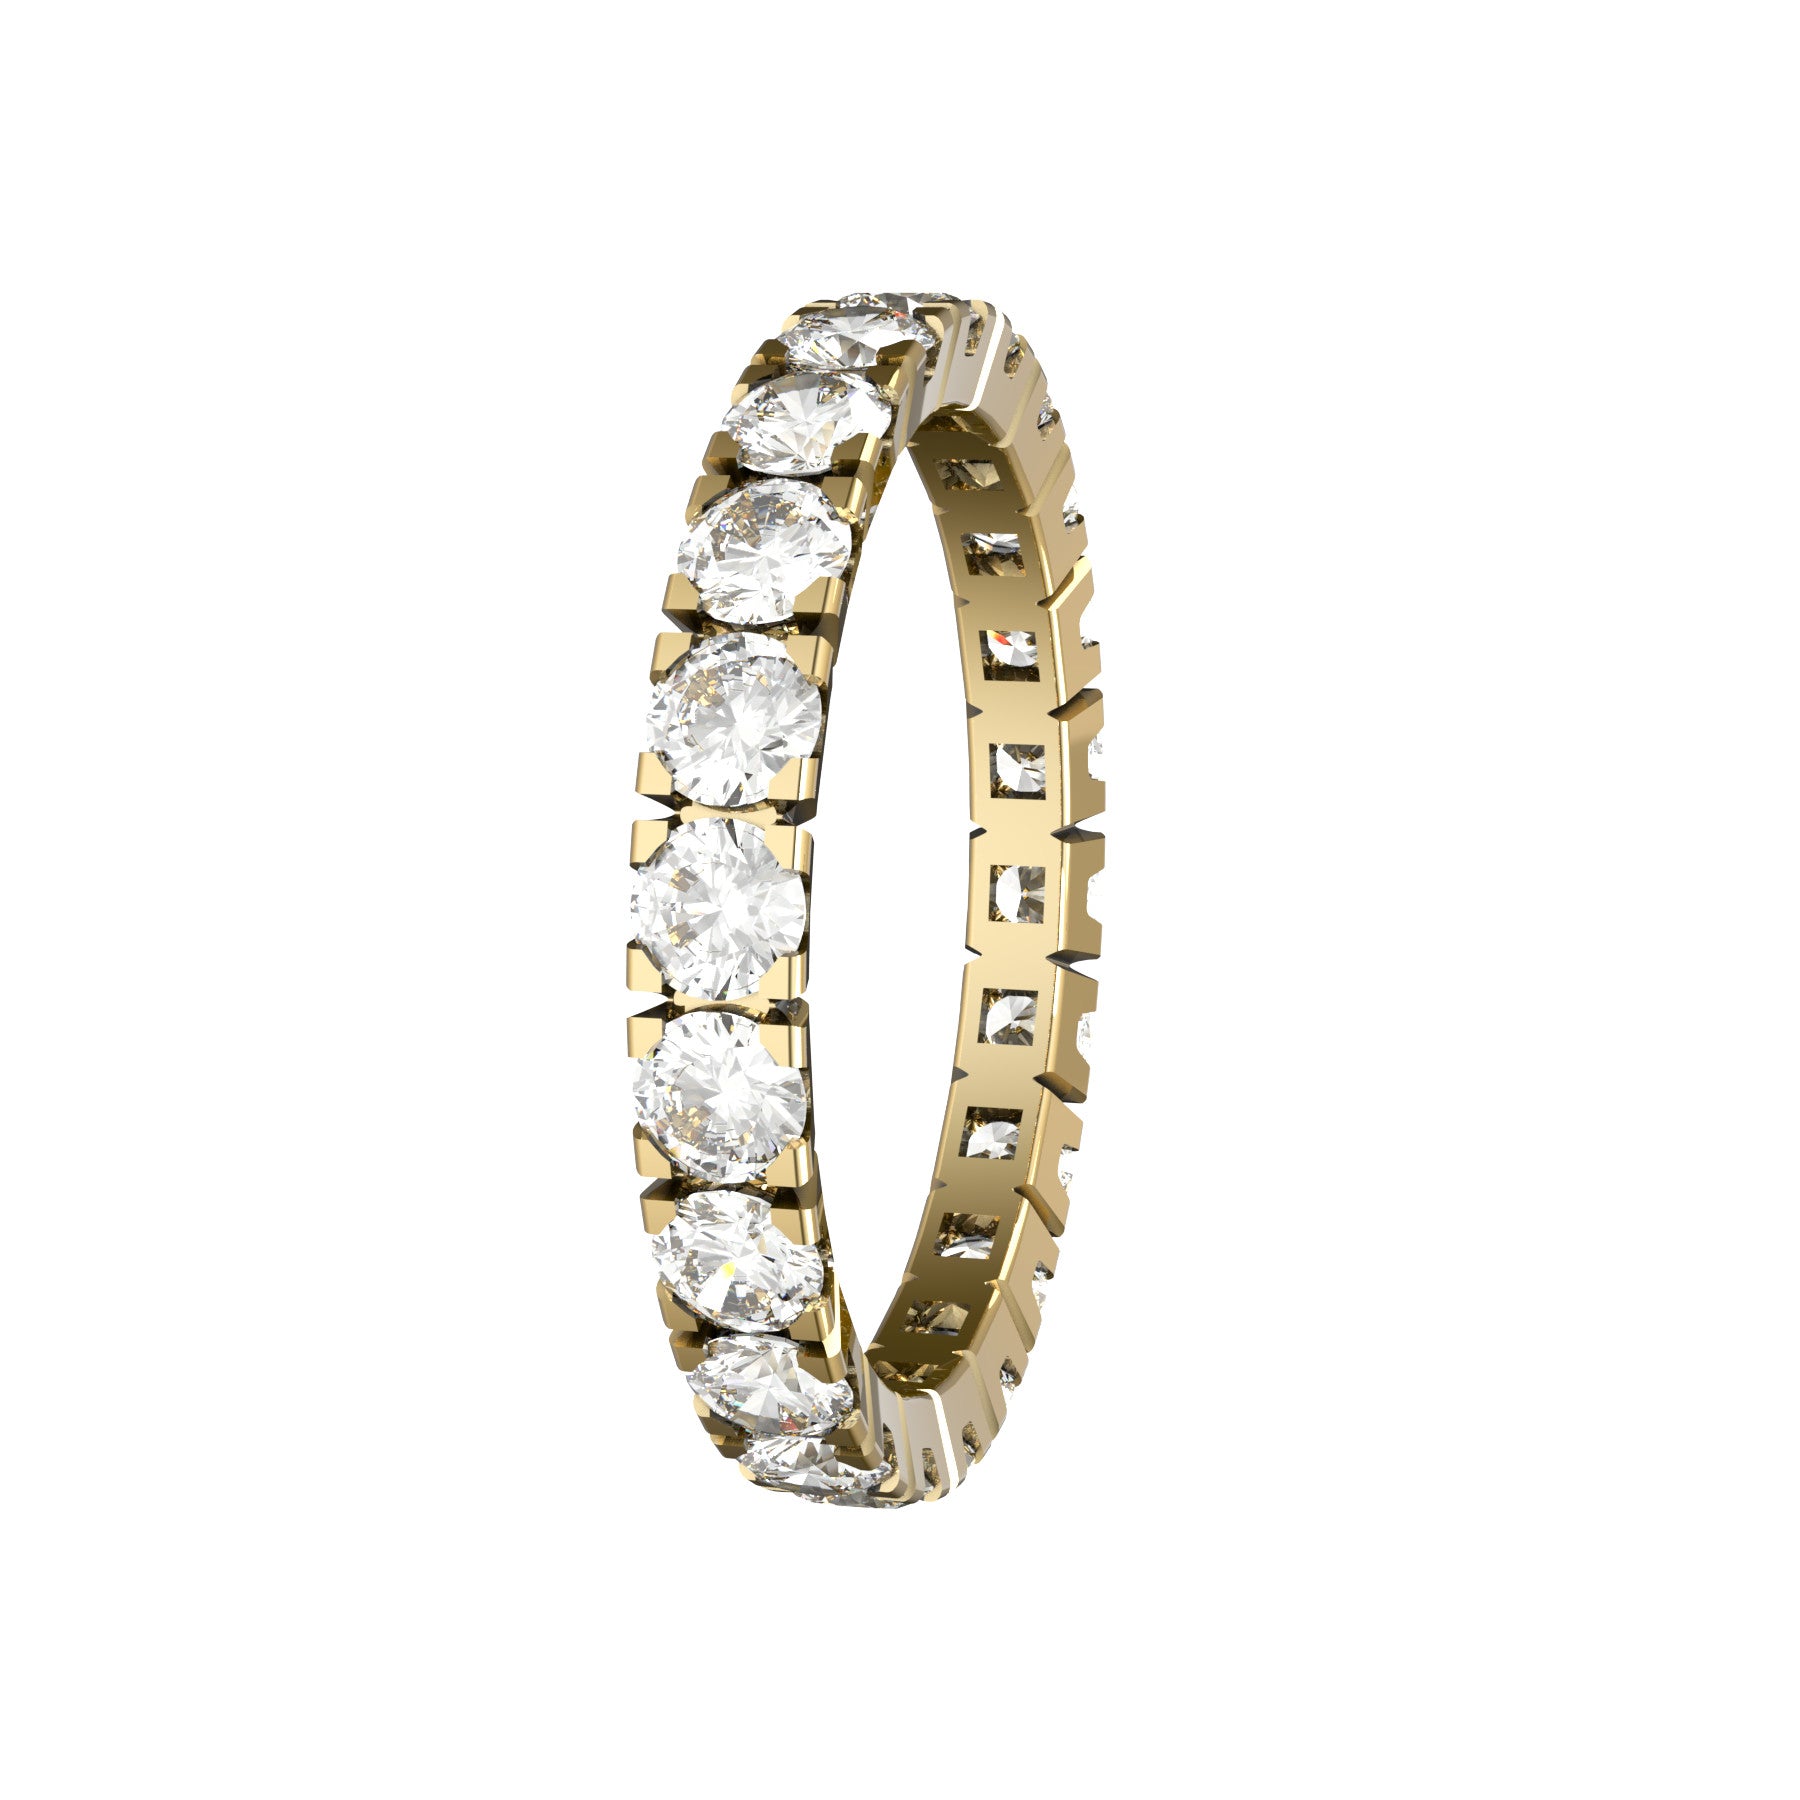 forever wedding ring, 18 K yellow gold, 0,07 ct round natural diamond, weight about 2,6 g. (0.07 oz), width 2,70 mm